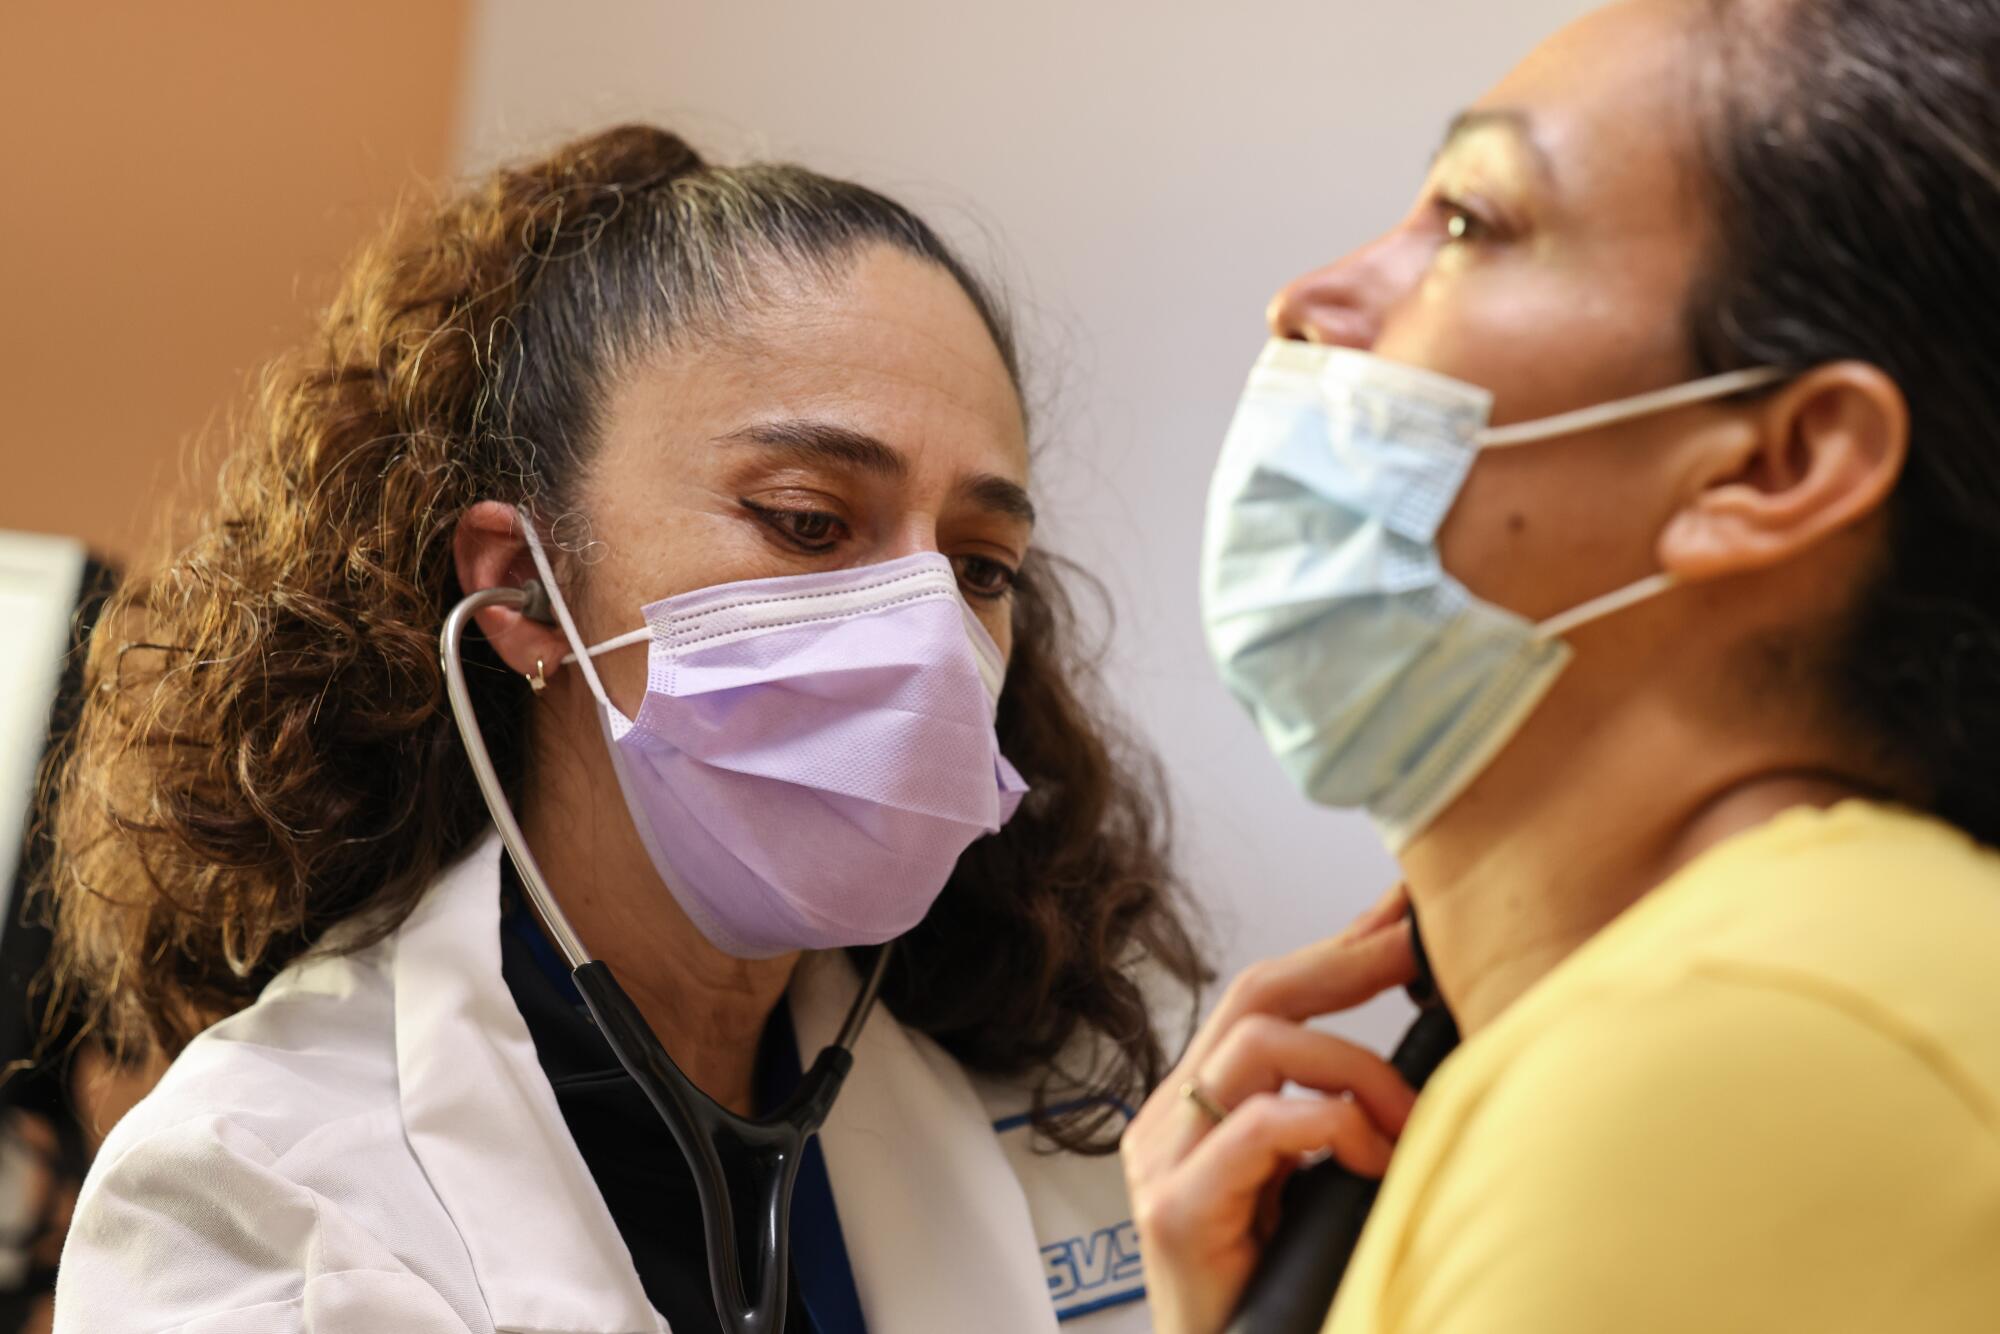 A masked doctor with wavy brown hair holds a stethoscope to the throat of a patient, also masked